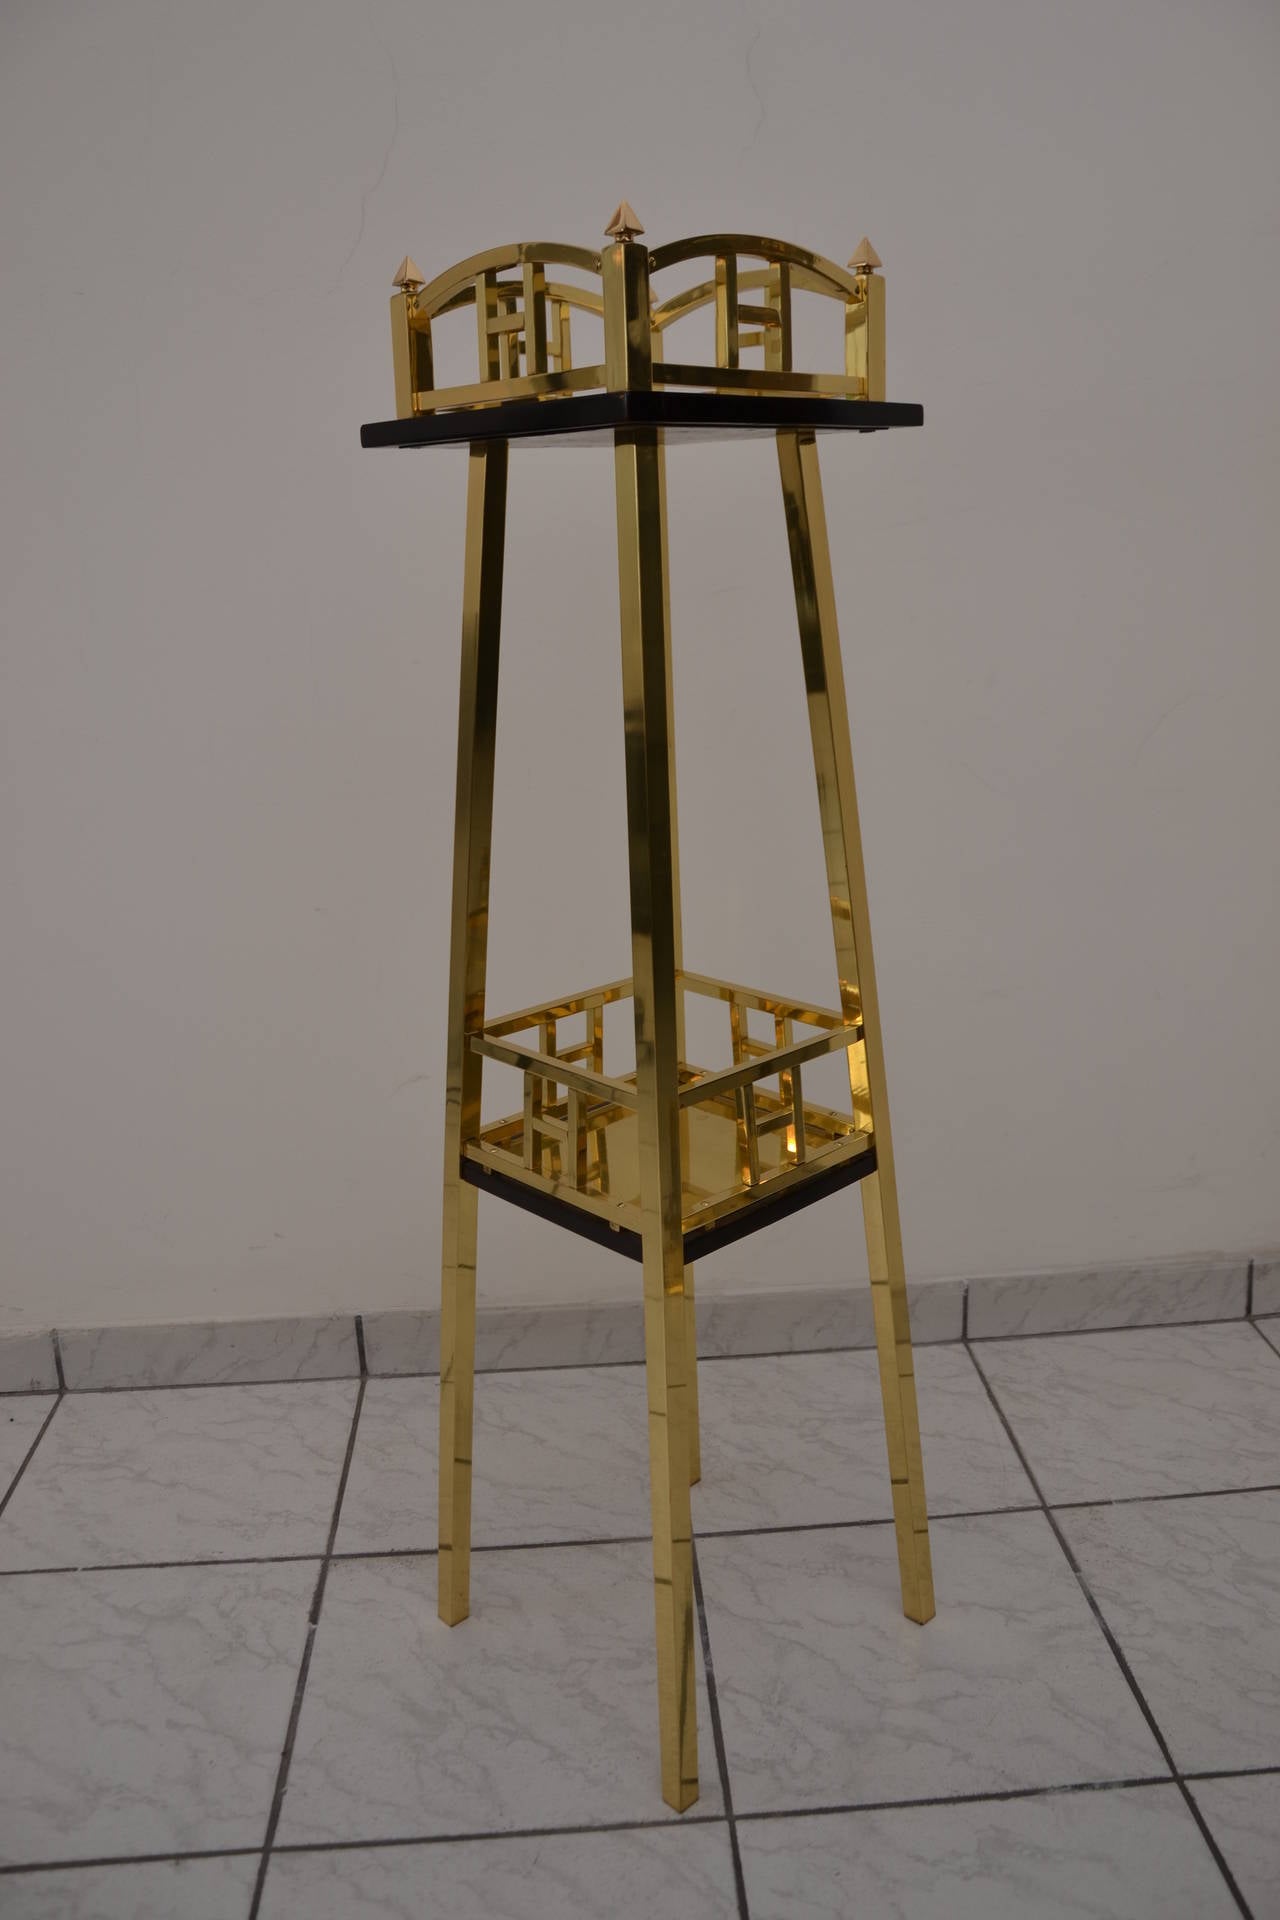 Brass flowerstand with black polished wood plate
Polished and stove enamelled